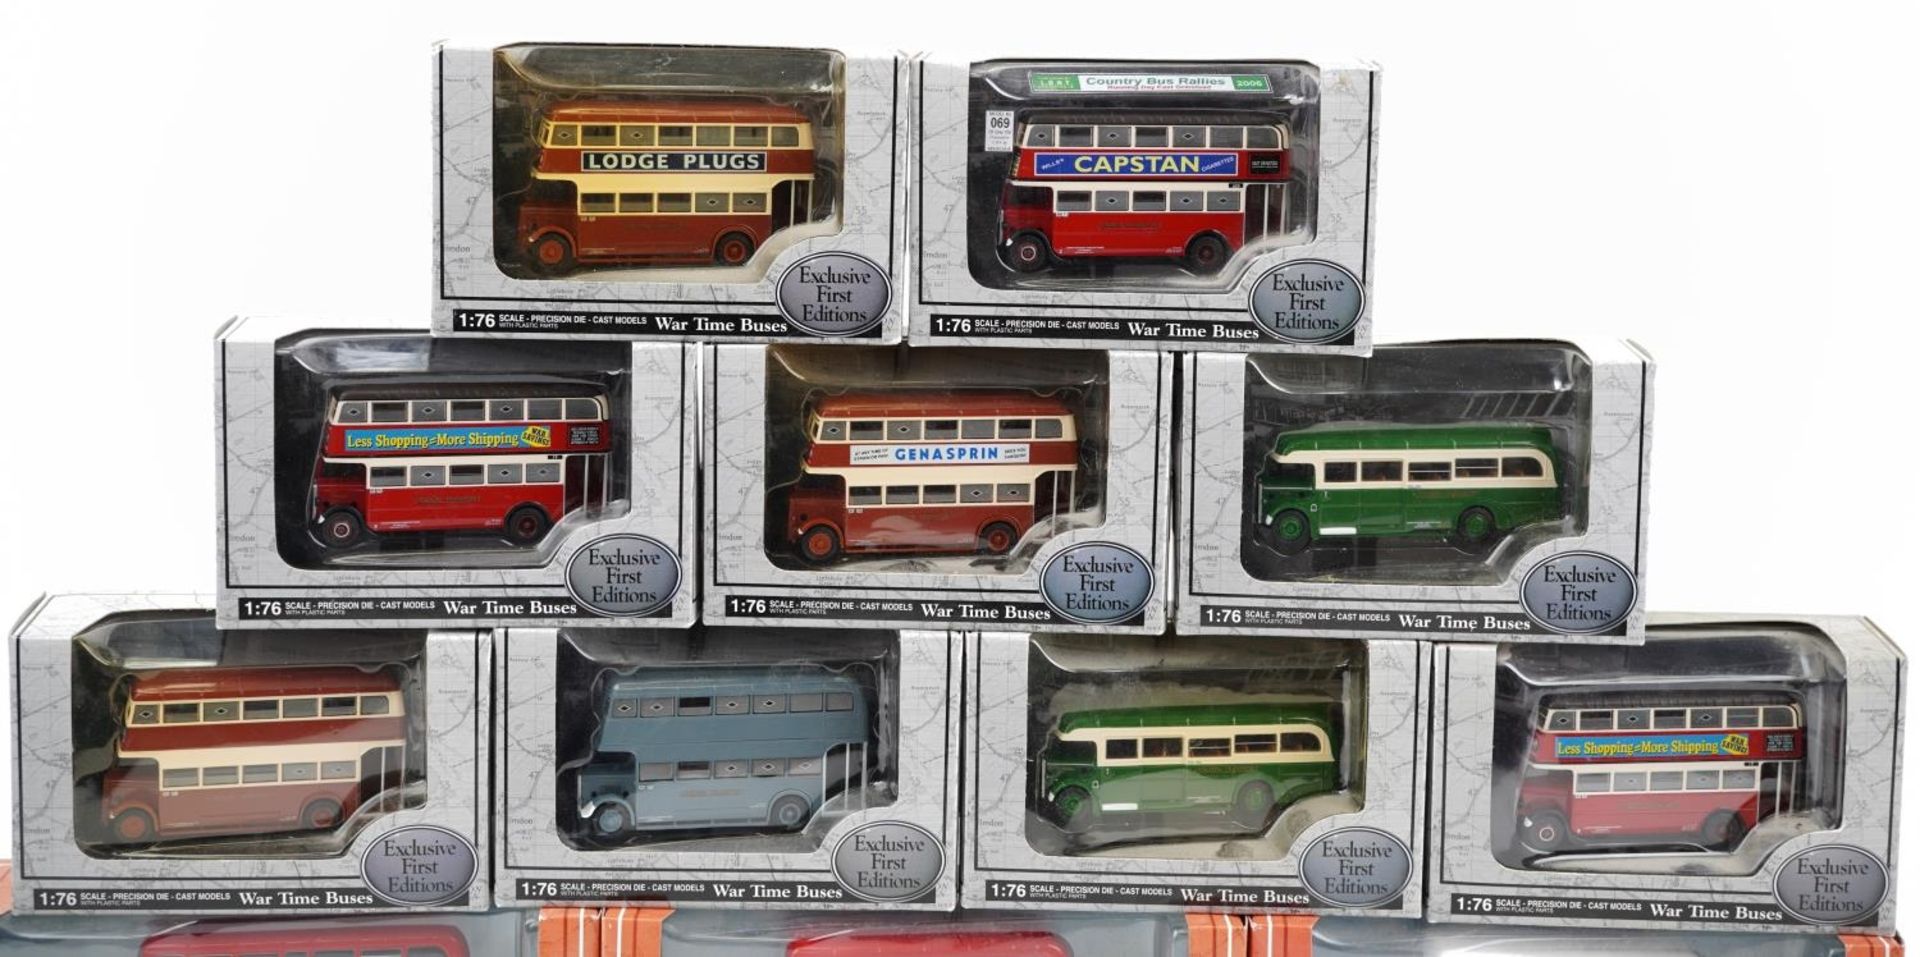 Sixteen Exclusive First Editions 1:76 scale diecast model buses with boxes from The Wartime Buses - Bild 2 aus 4